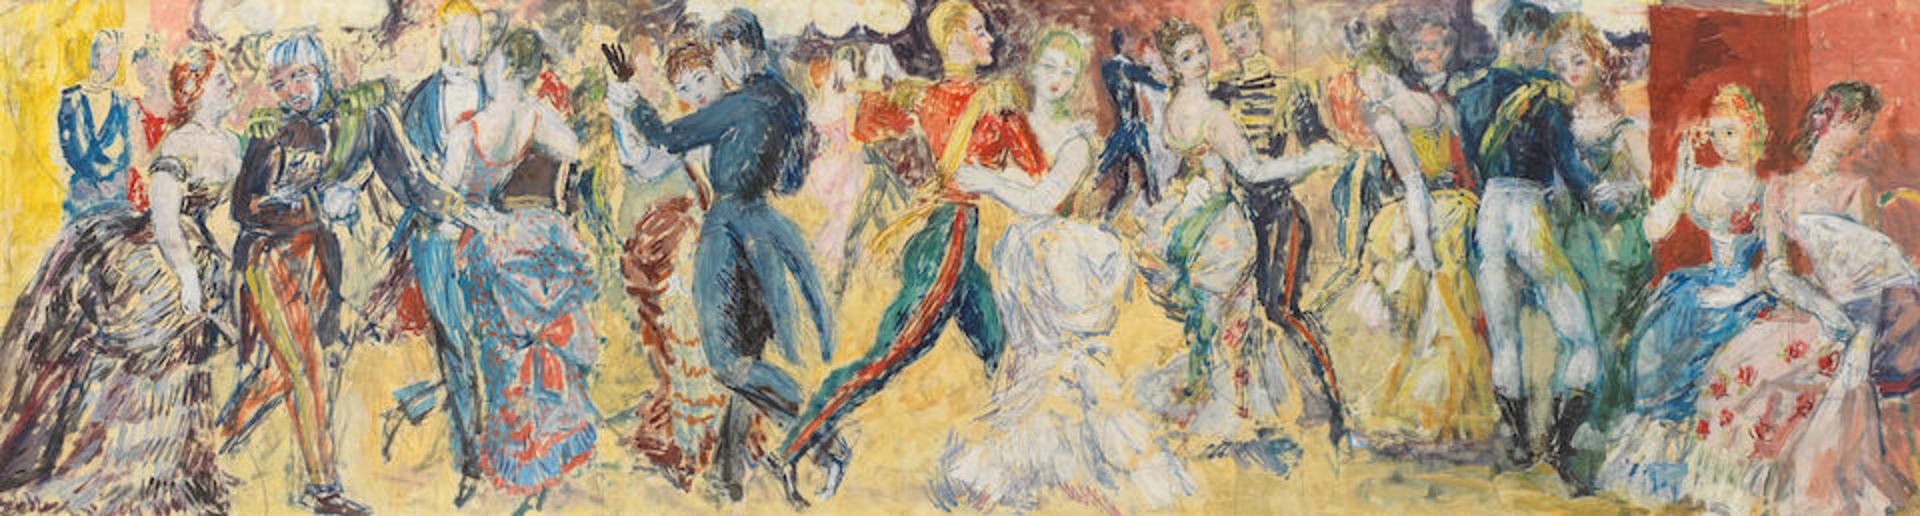 Duncan Grant (British, 1885-1978) Cinderella at the Ball (For the Devonshire Hill School Mural) ...